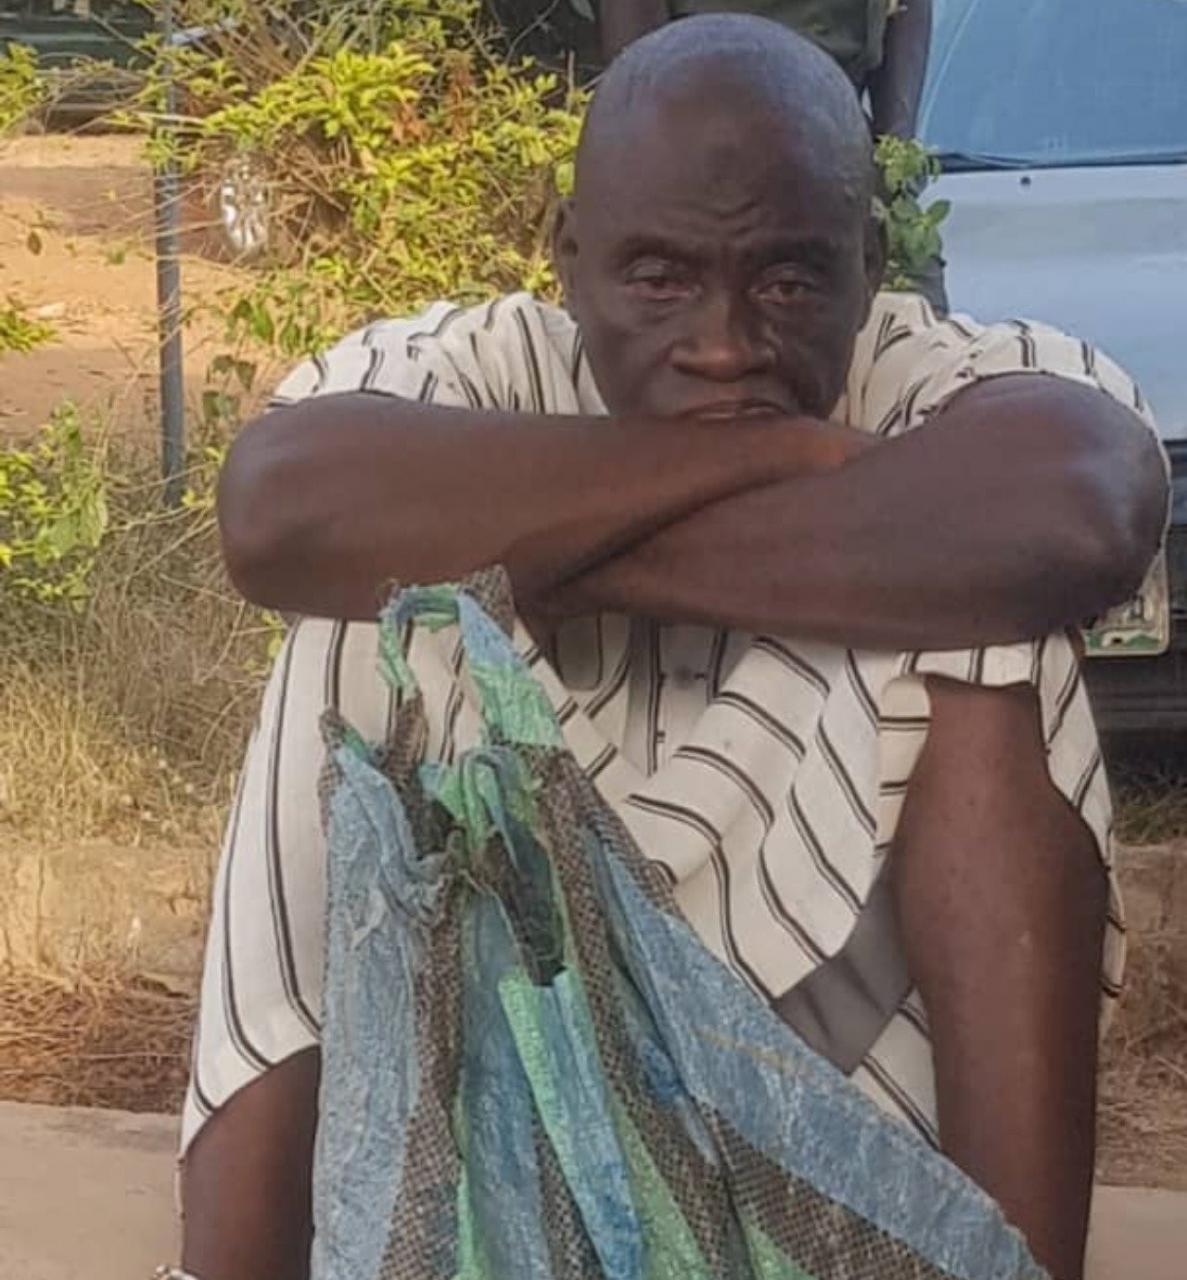 I ordered for the human head to make my life better - 55-year-old man says after being arrested with fresh human head in Ondo